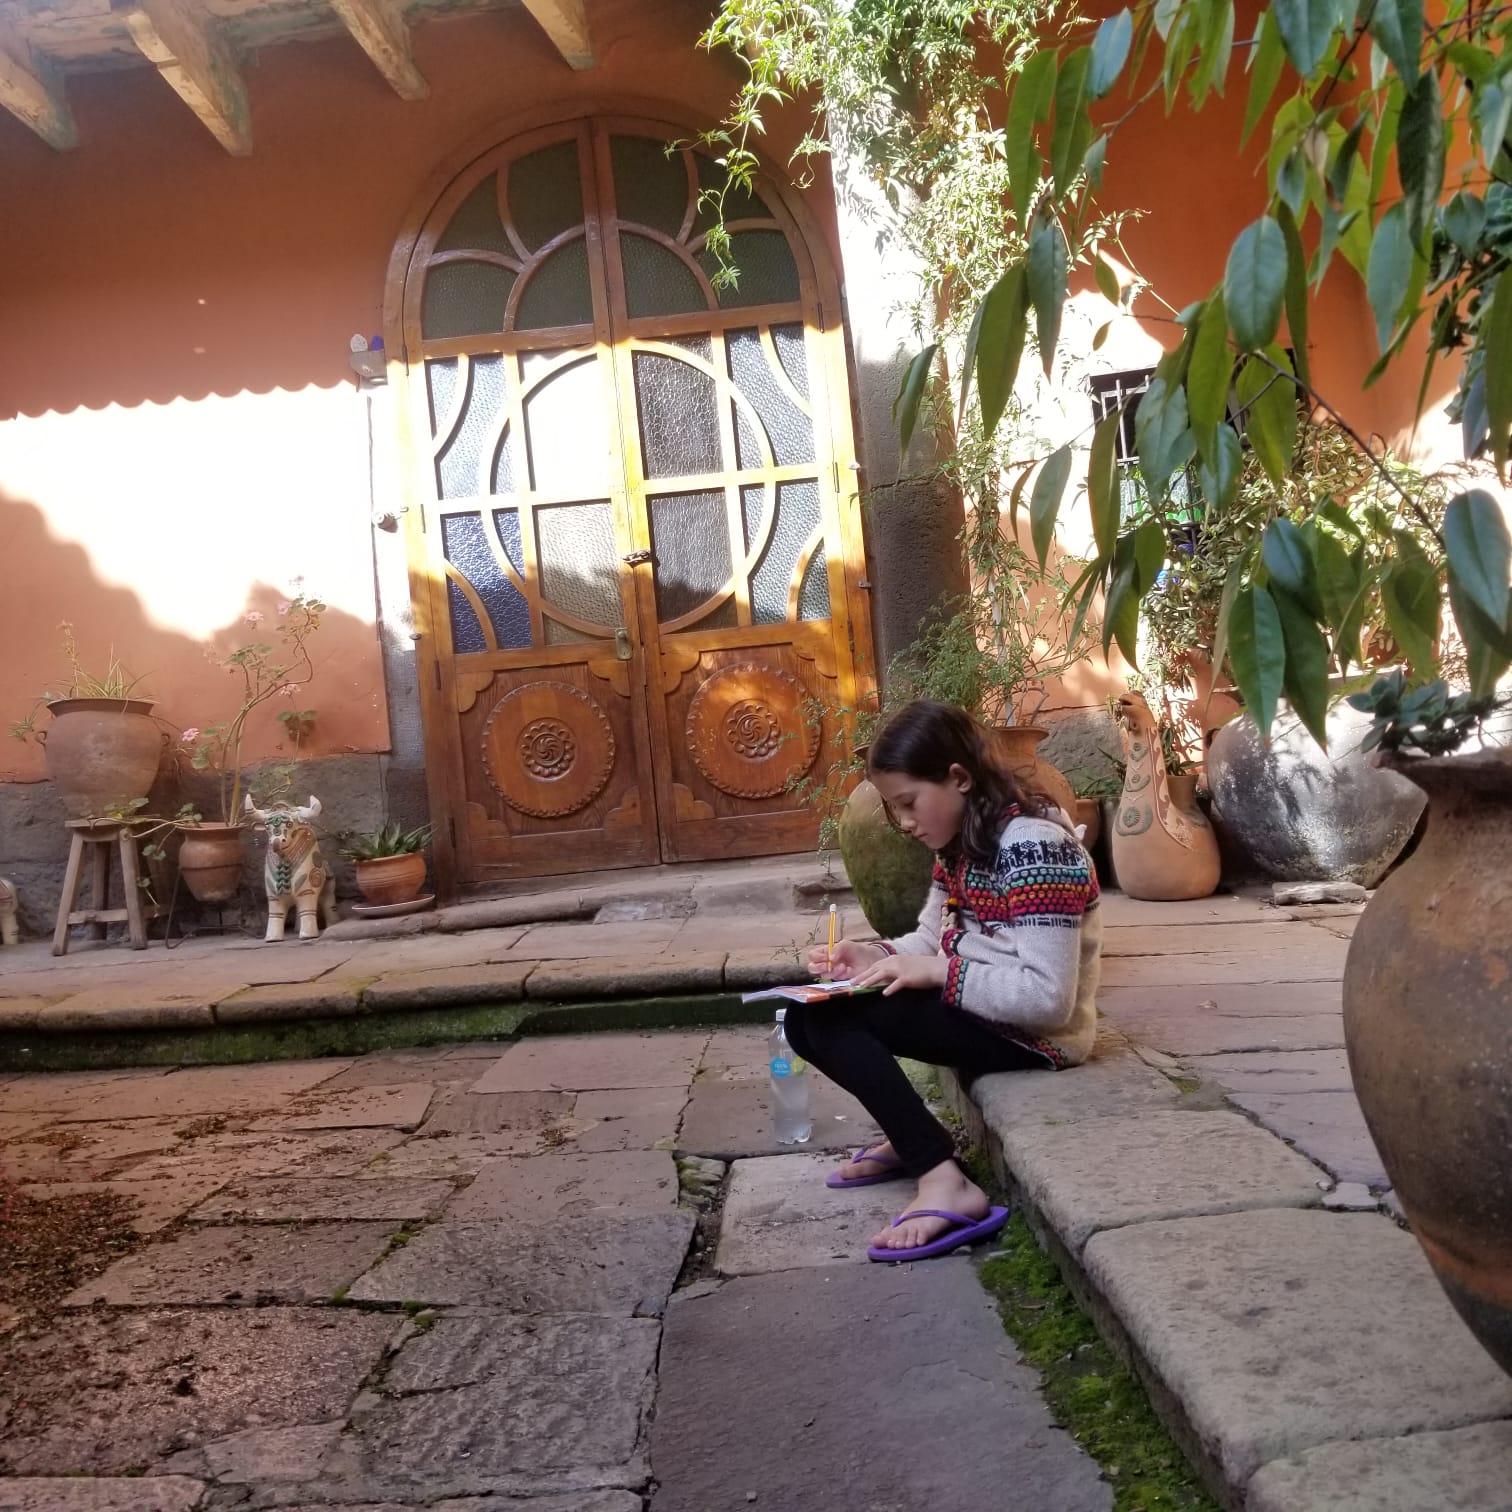 Anya Bailey, 8, has started journaling her experience during the lockdown in Peru, mom Stephanie said. She is pictured in the courtyard of the Airbnb where the family is staying.